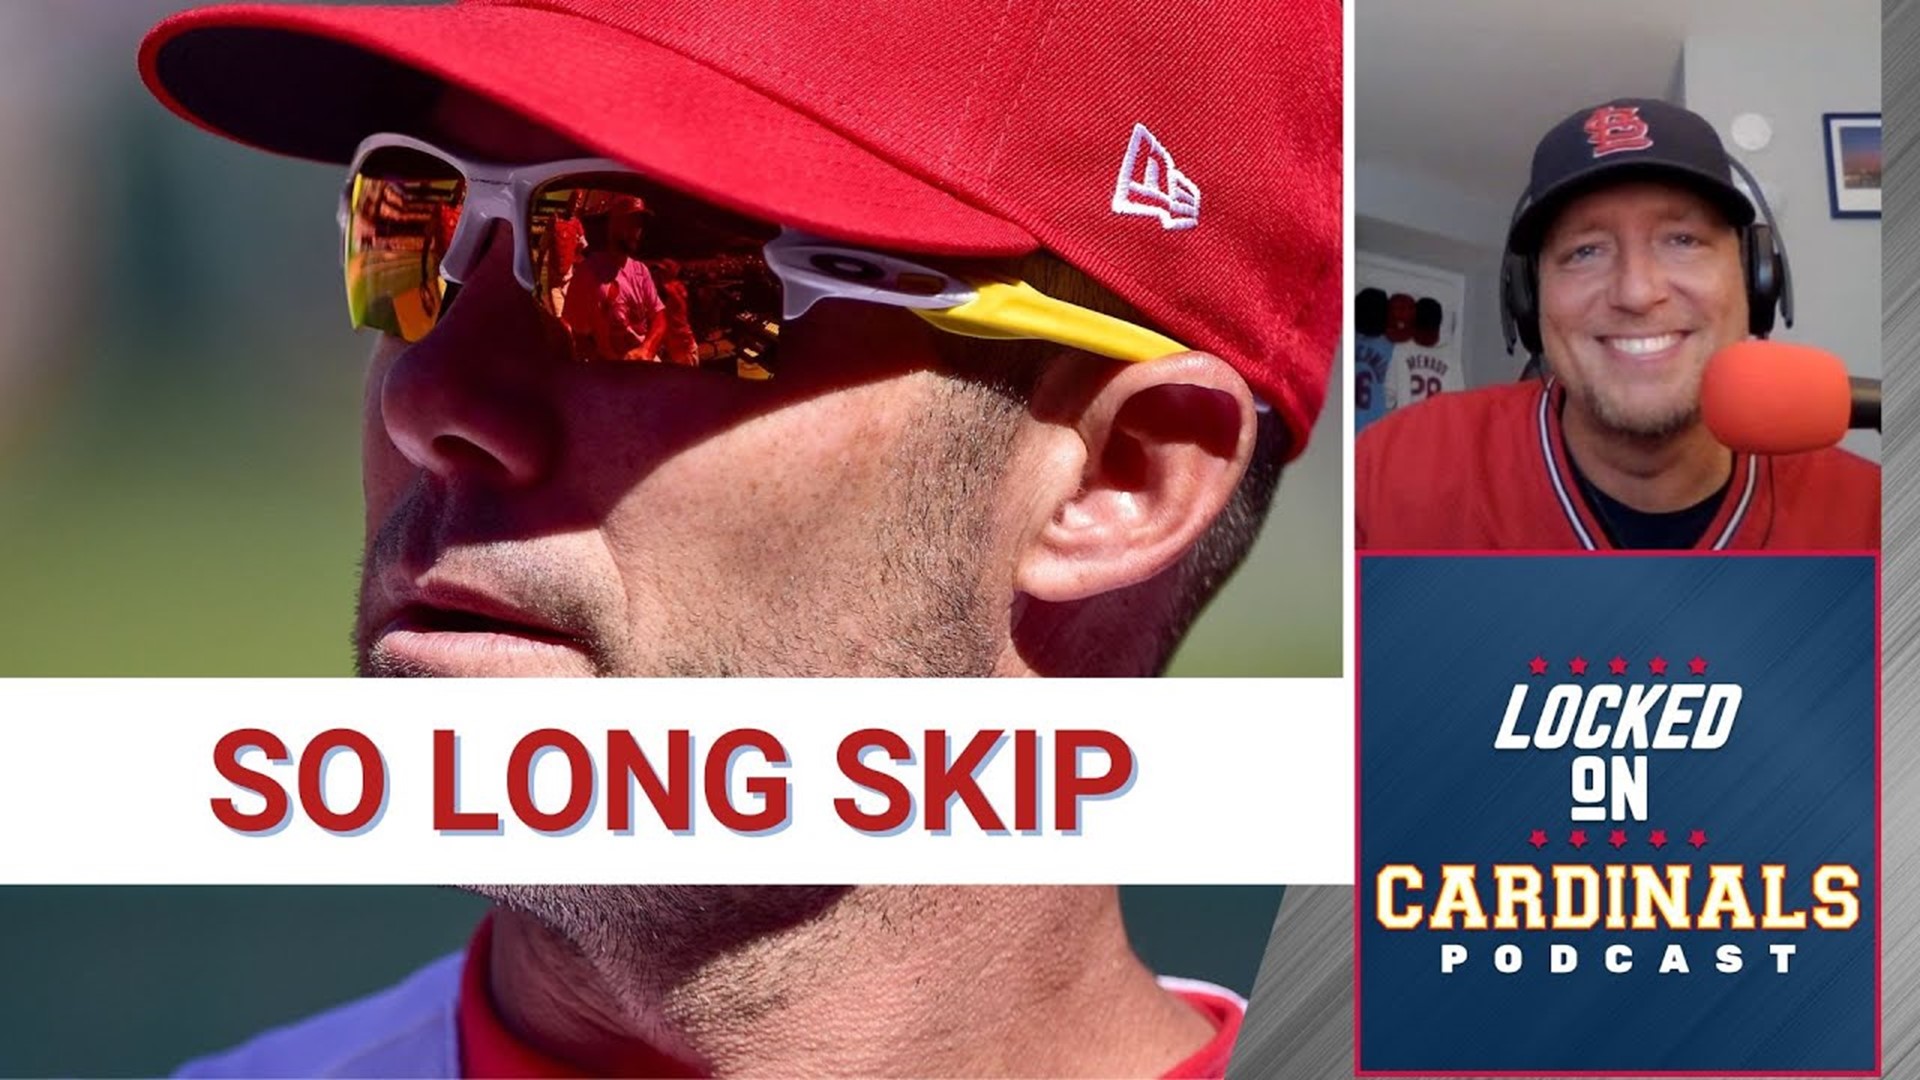 Skip Schumaker is leaving the St. Louis Cardinals to become the new manager of the Miami Marlins. Also get Arizona Fall League updates from Locked On Cardinals.